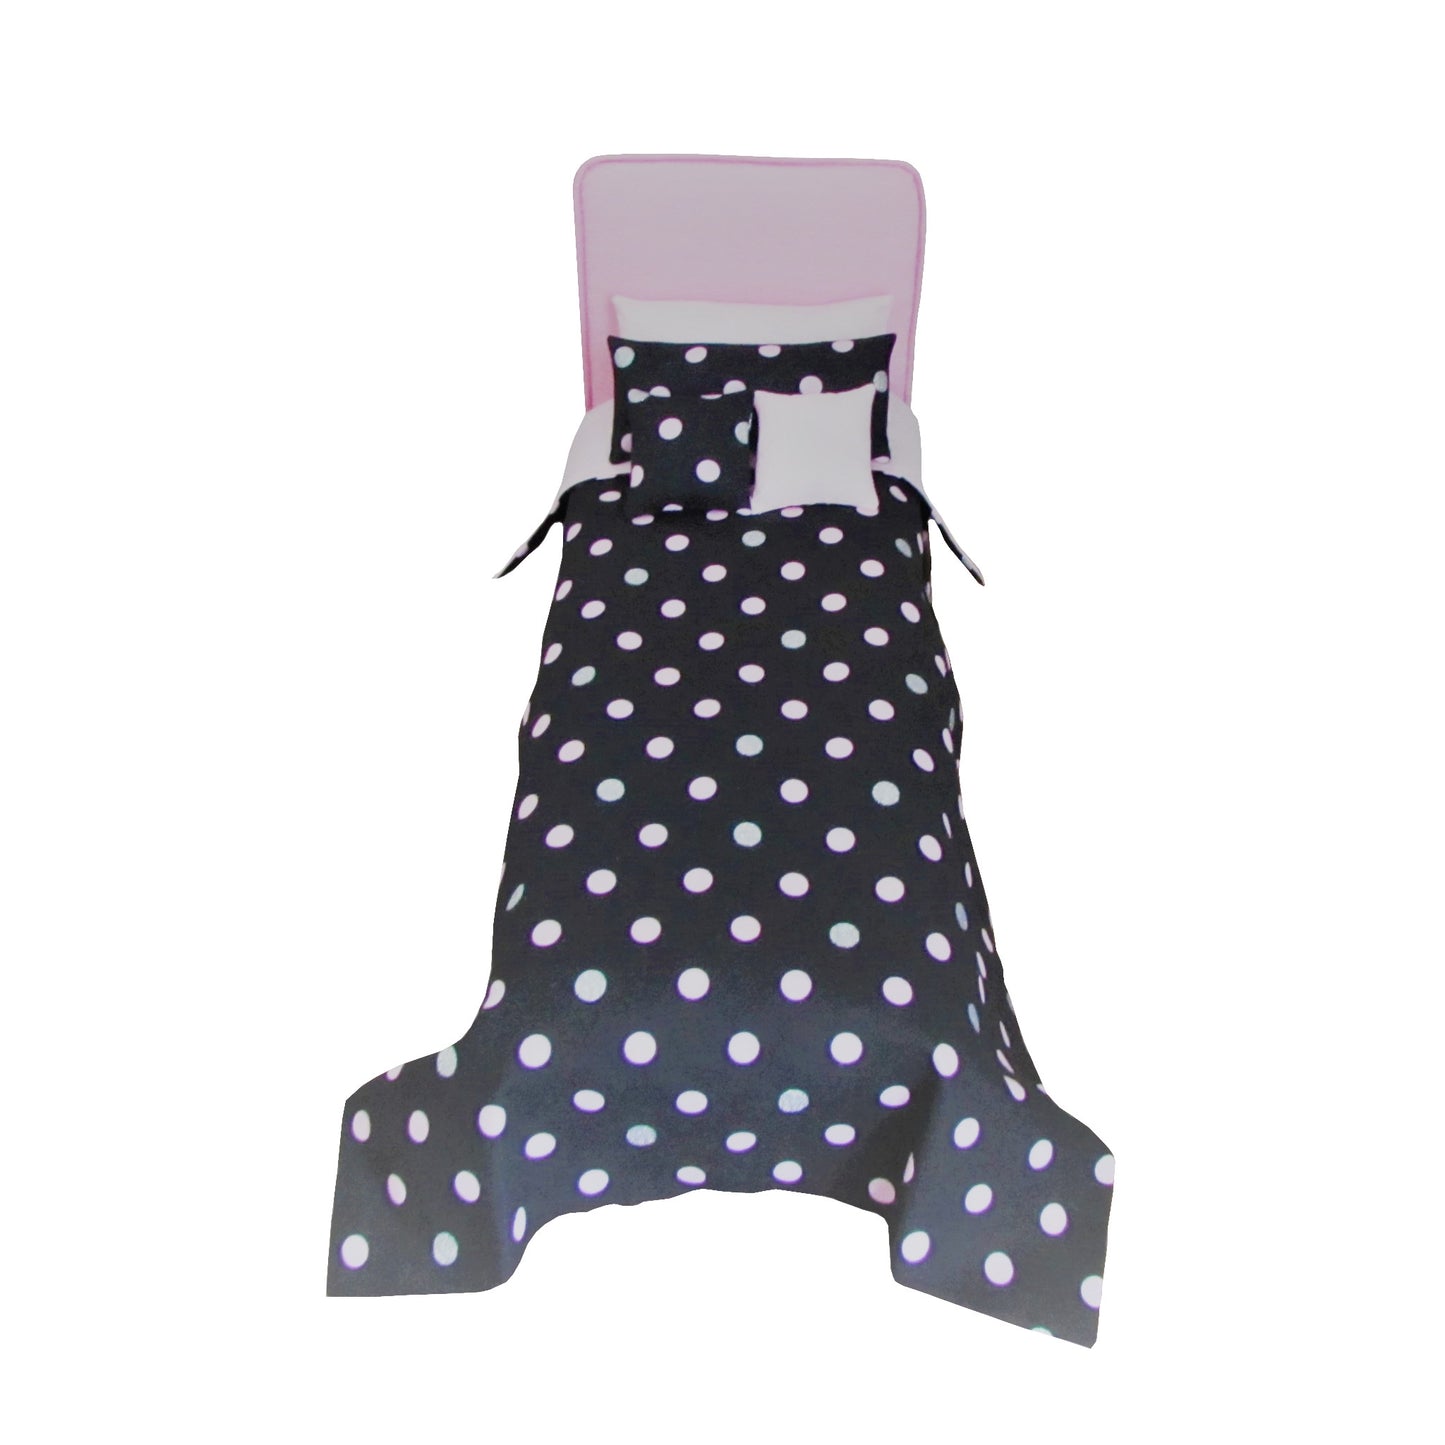 Doll Bed and Pink Silver Dots Doll Bedding 11.5-inch and 12-inch dolls